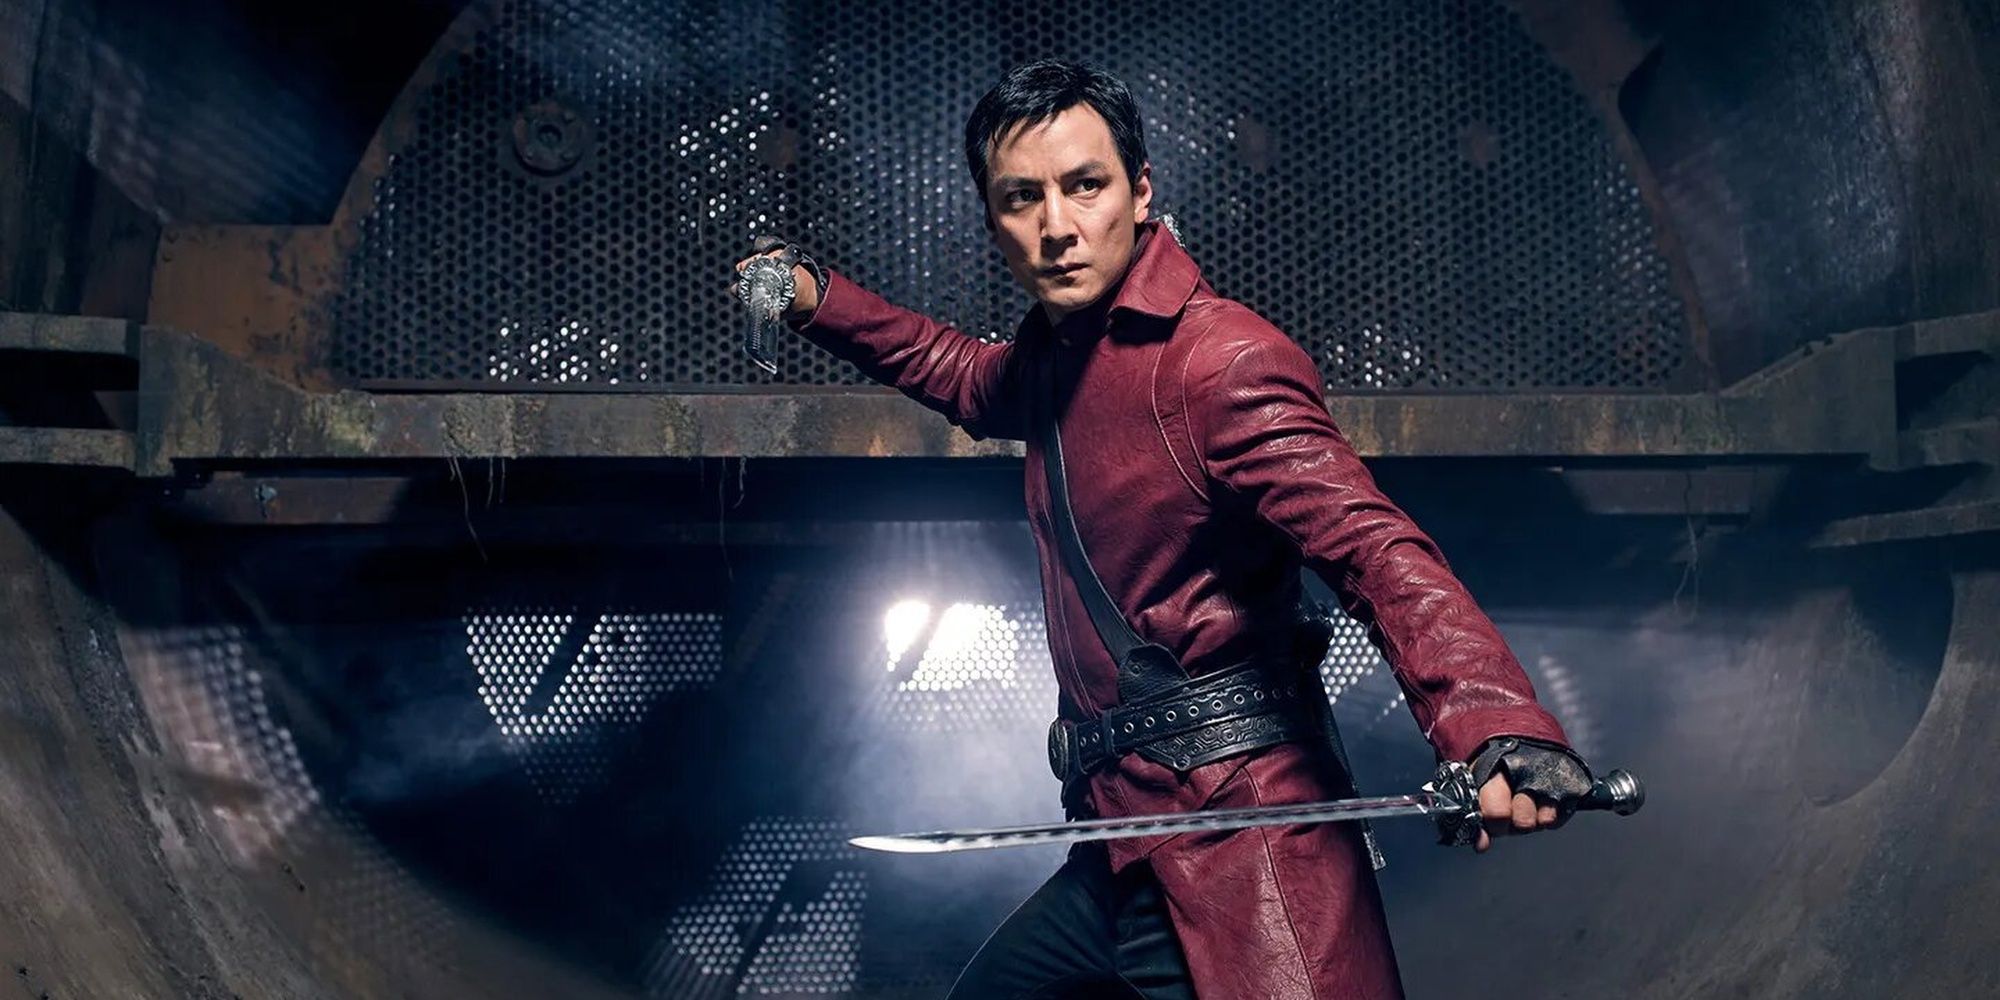 Daniel Wu as Sunny, standing ready with his swords, in Into the Badlands